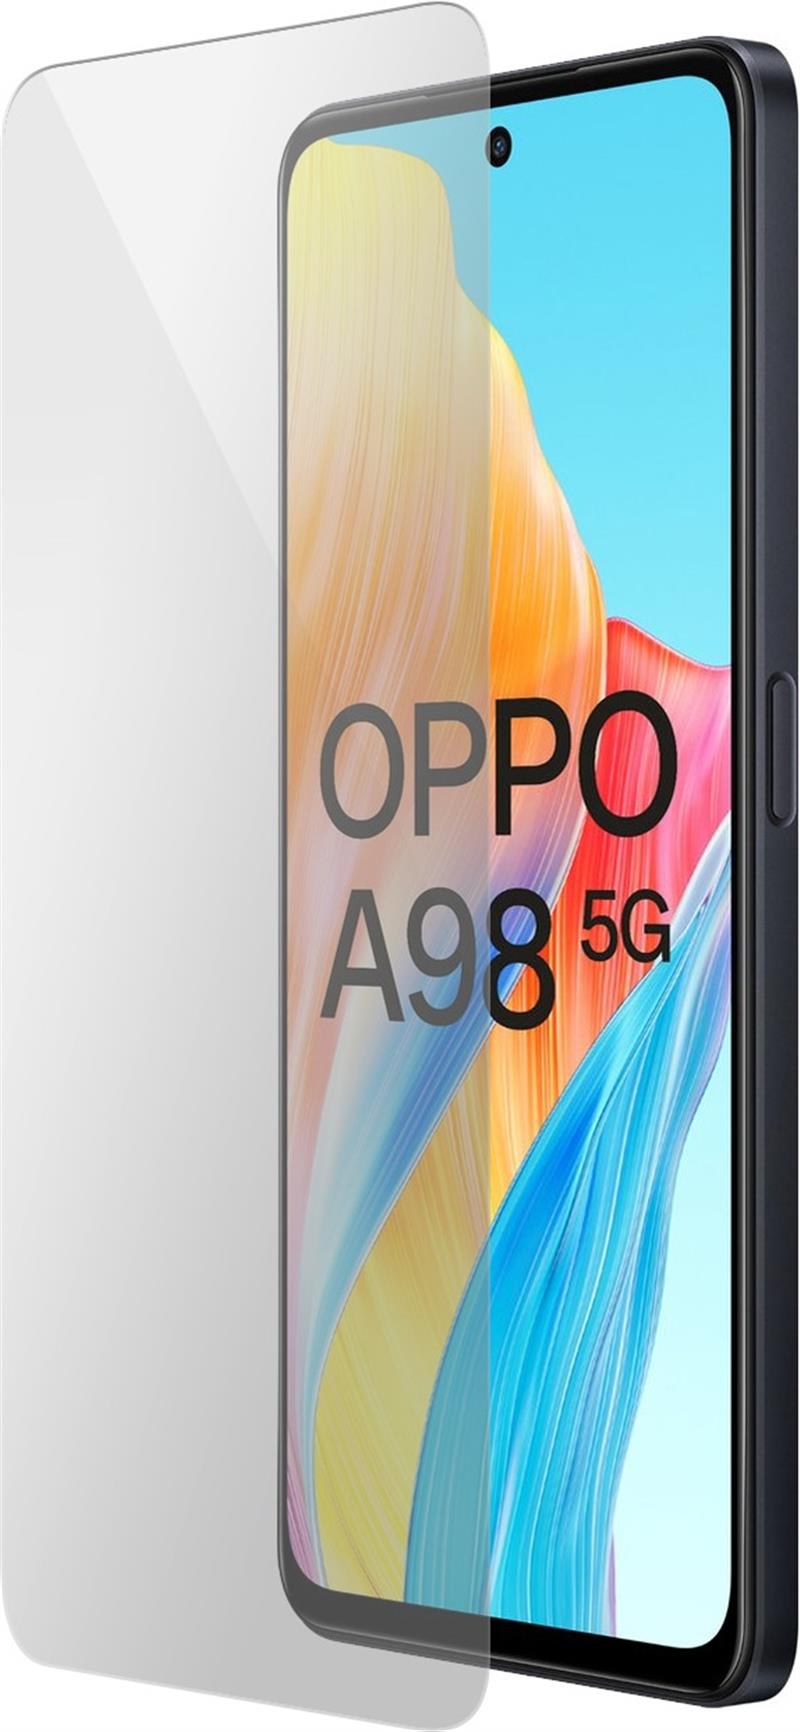 Mobiparts Regular Tempered Glass Oppo A98 5G